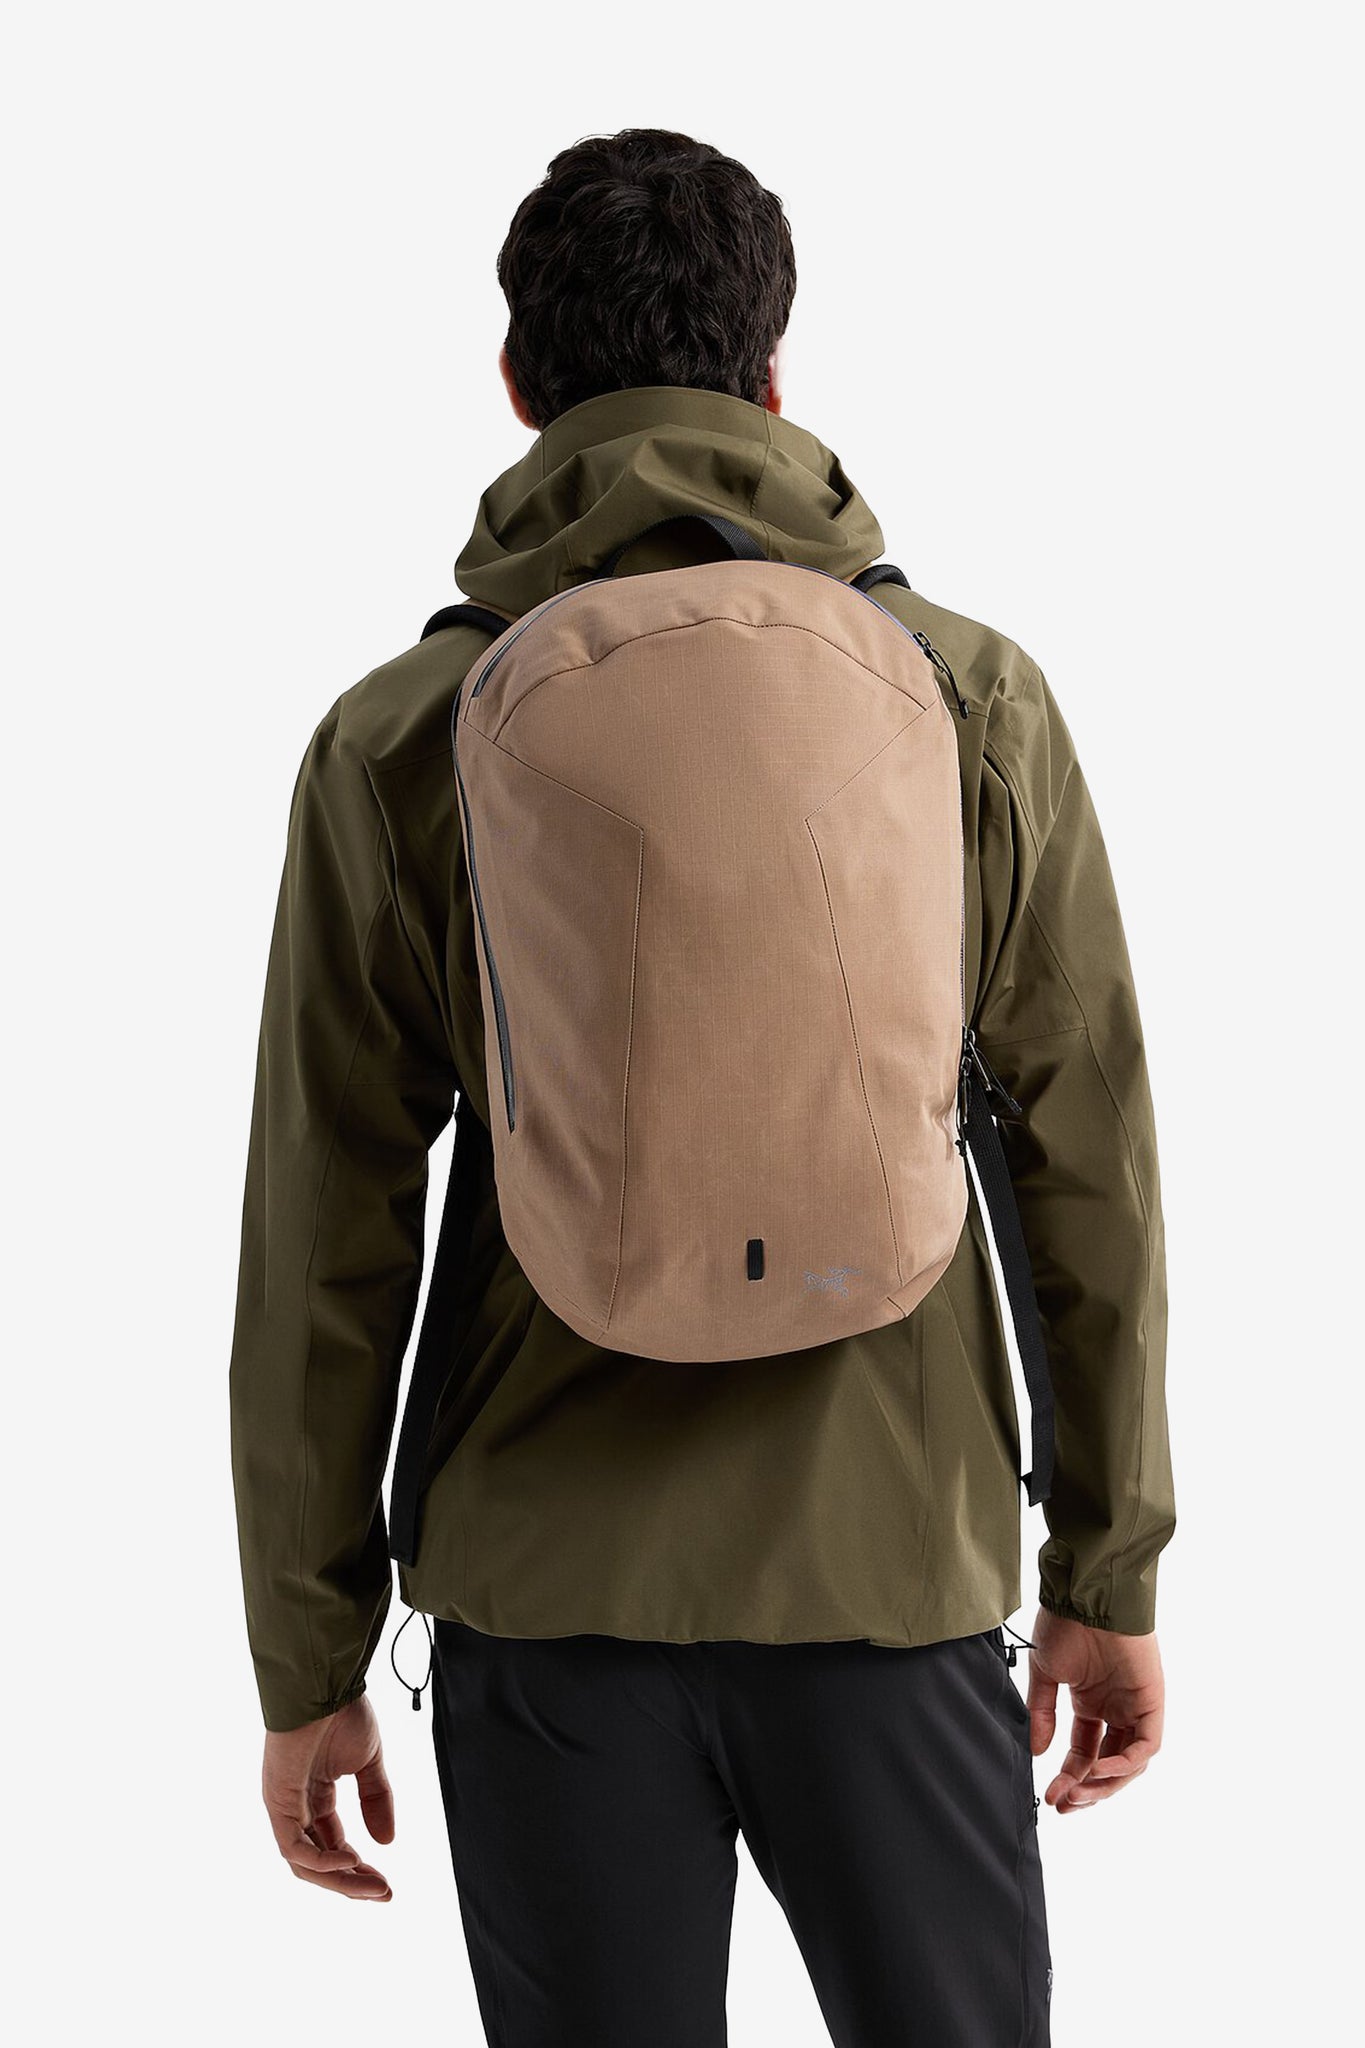 Arc'teryx Unisex Granville 16 Backpack in Canvas